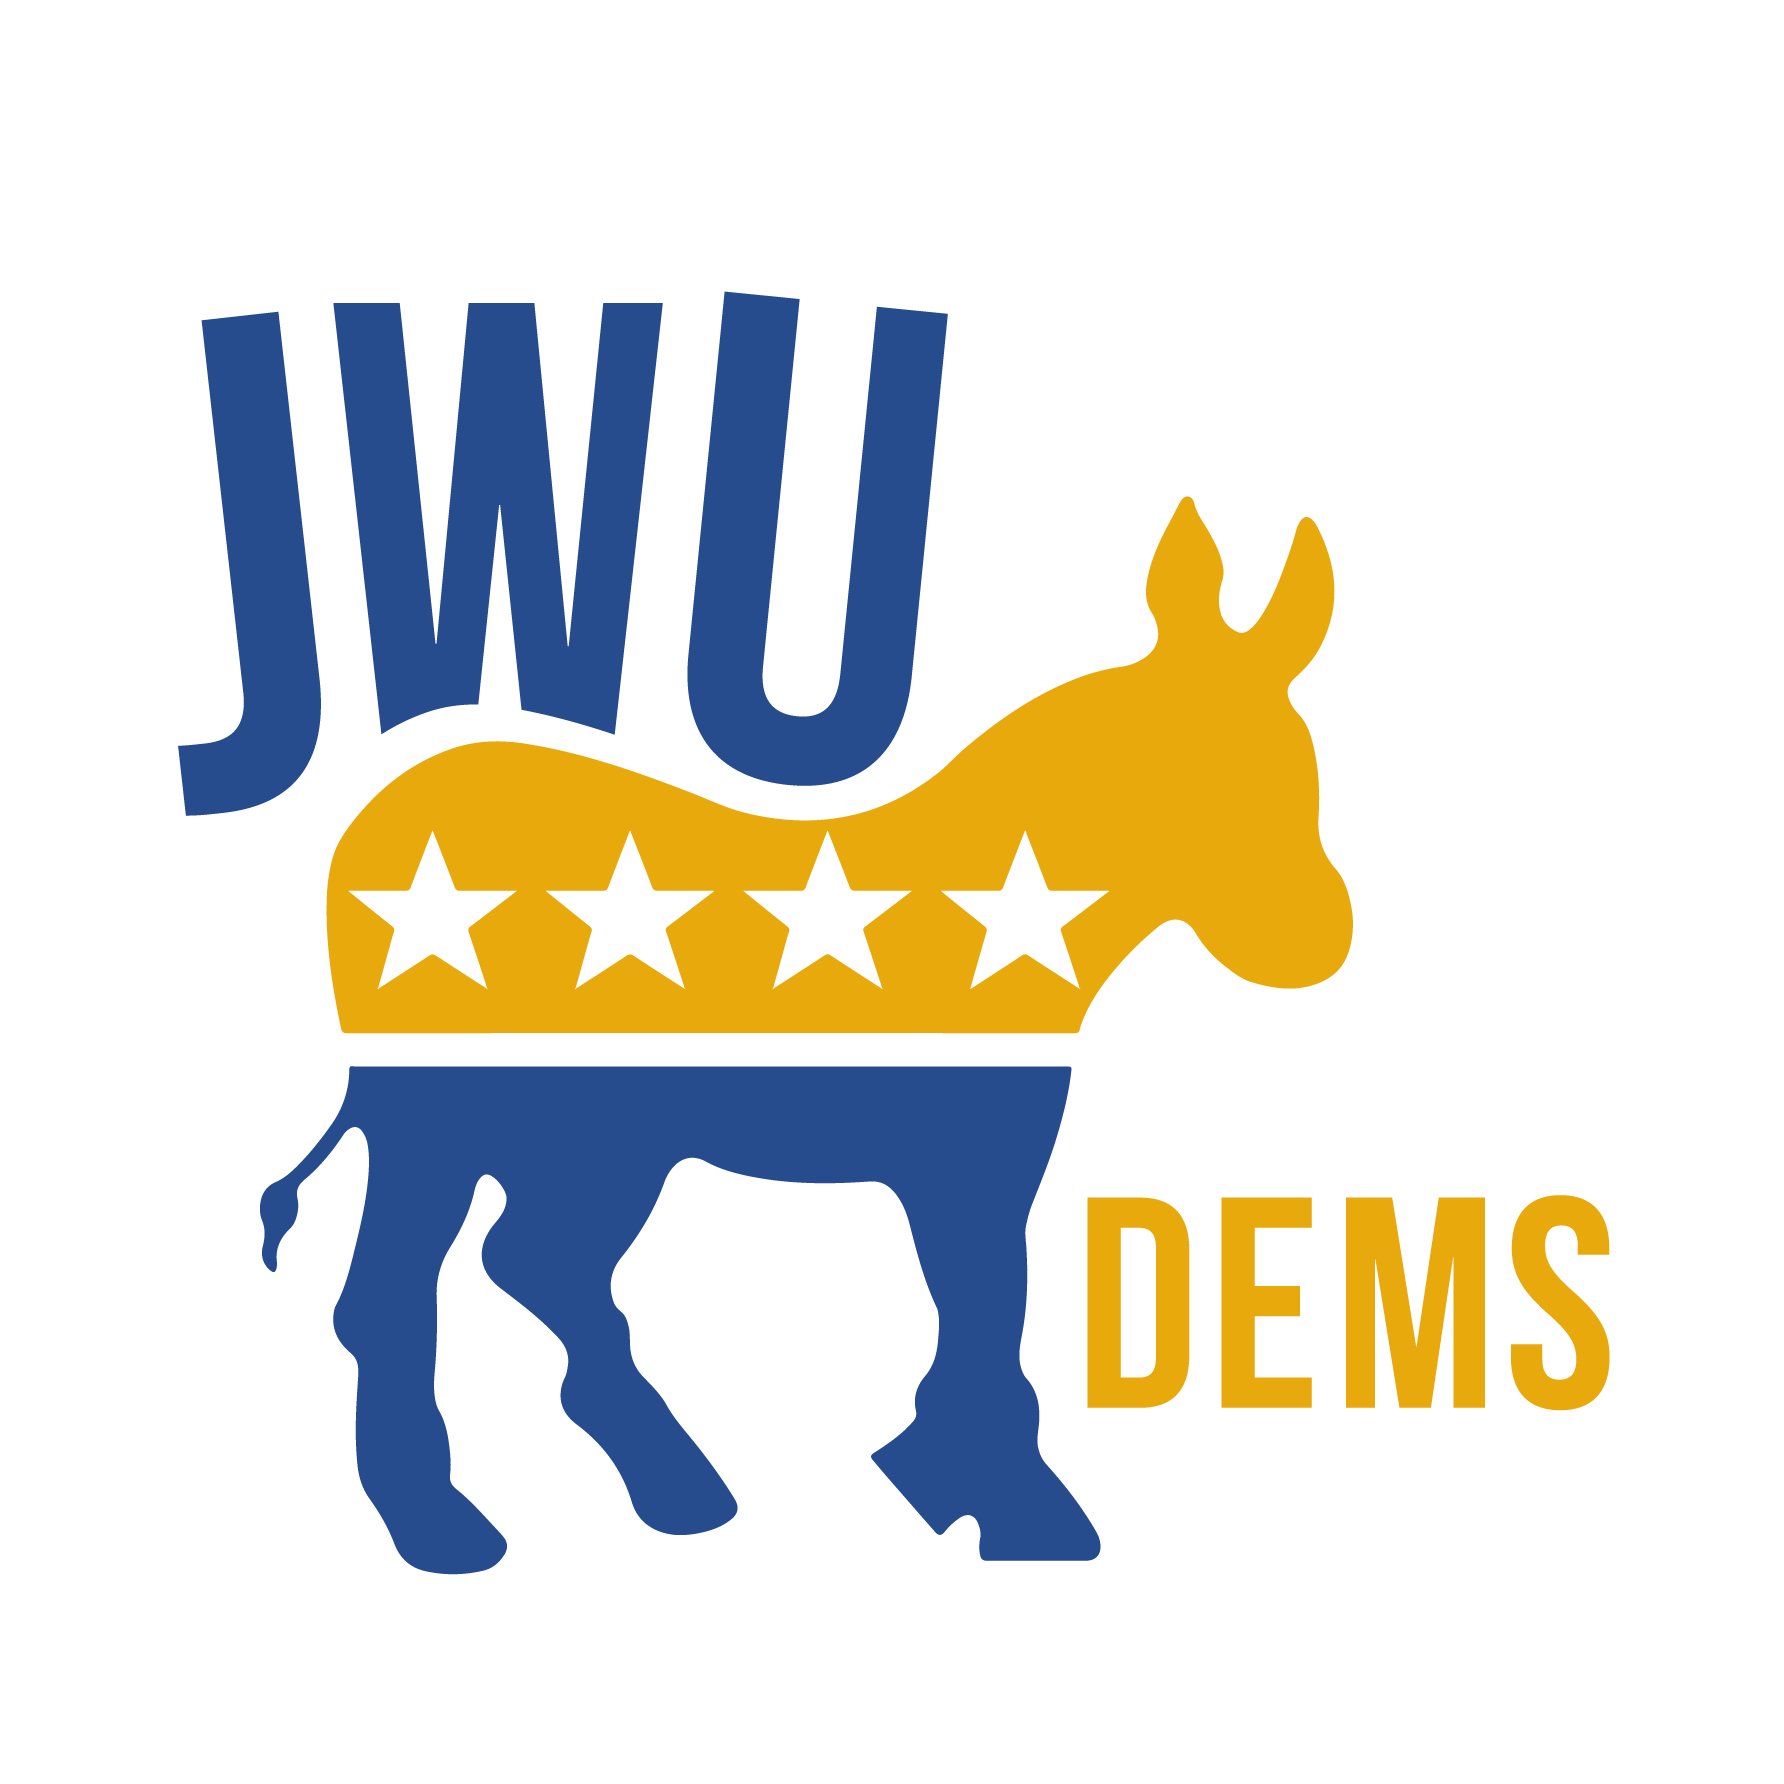 Bringing the Blue Wave to Johnson & Wales